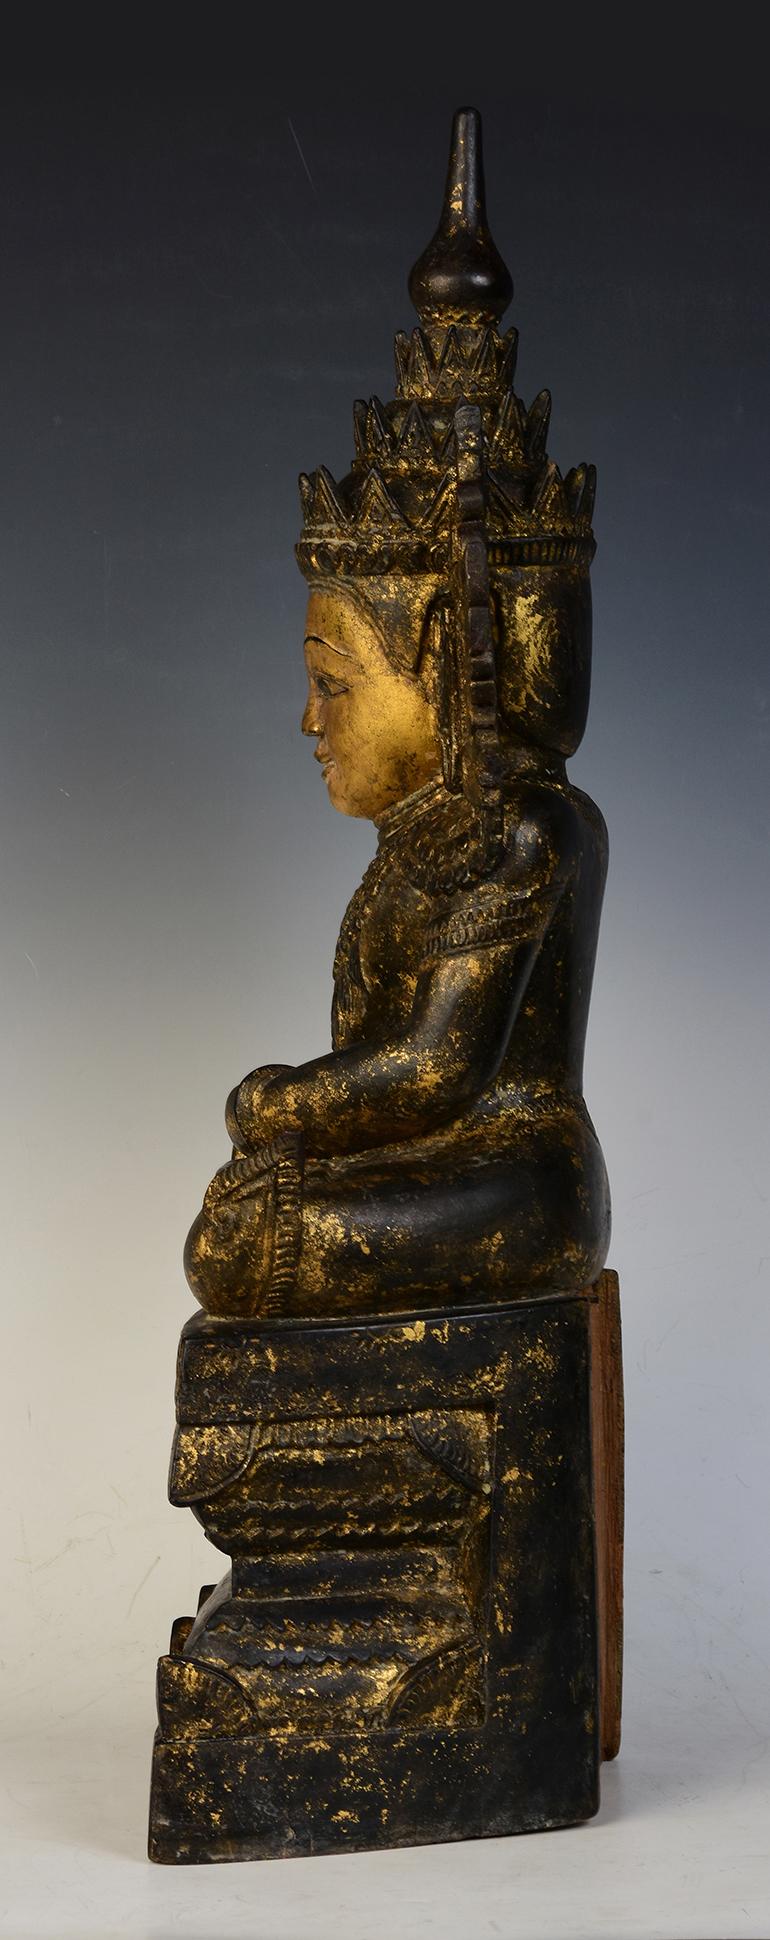 17th Century, Very Rare Antique Burmese Wooden Seated Crowned Buddha  For Sale 6